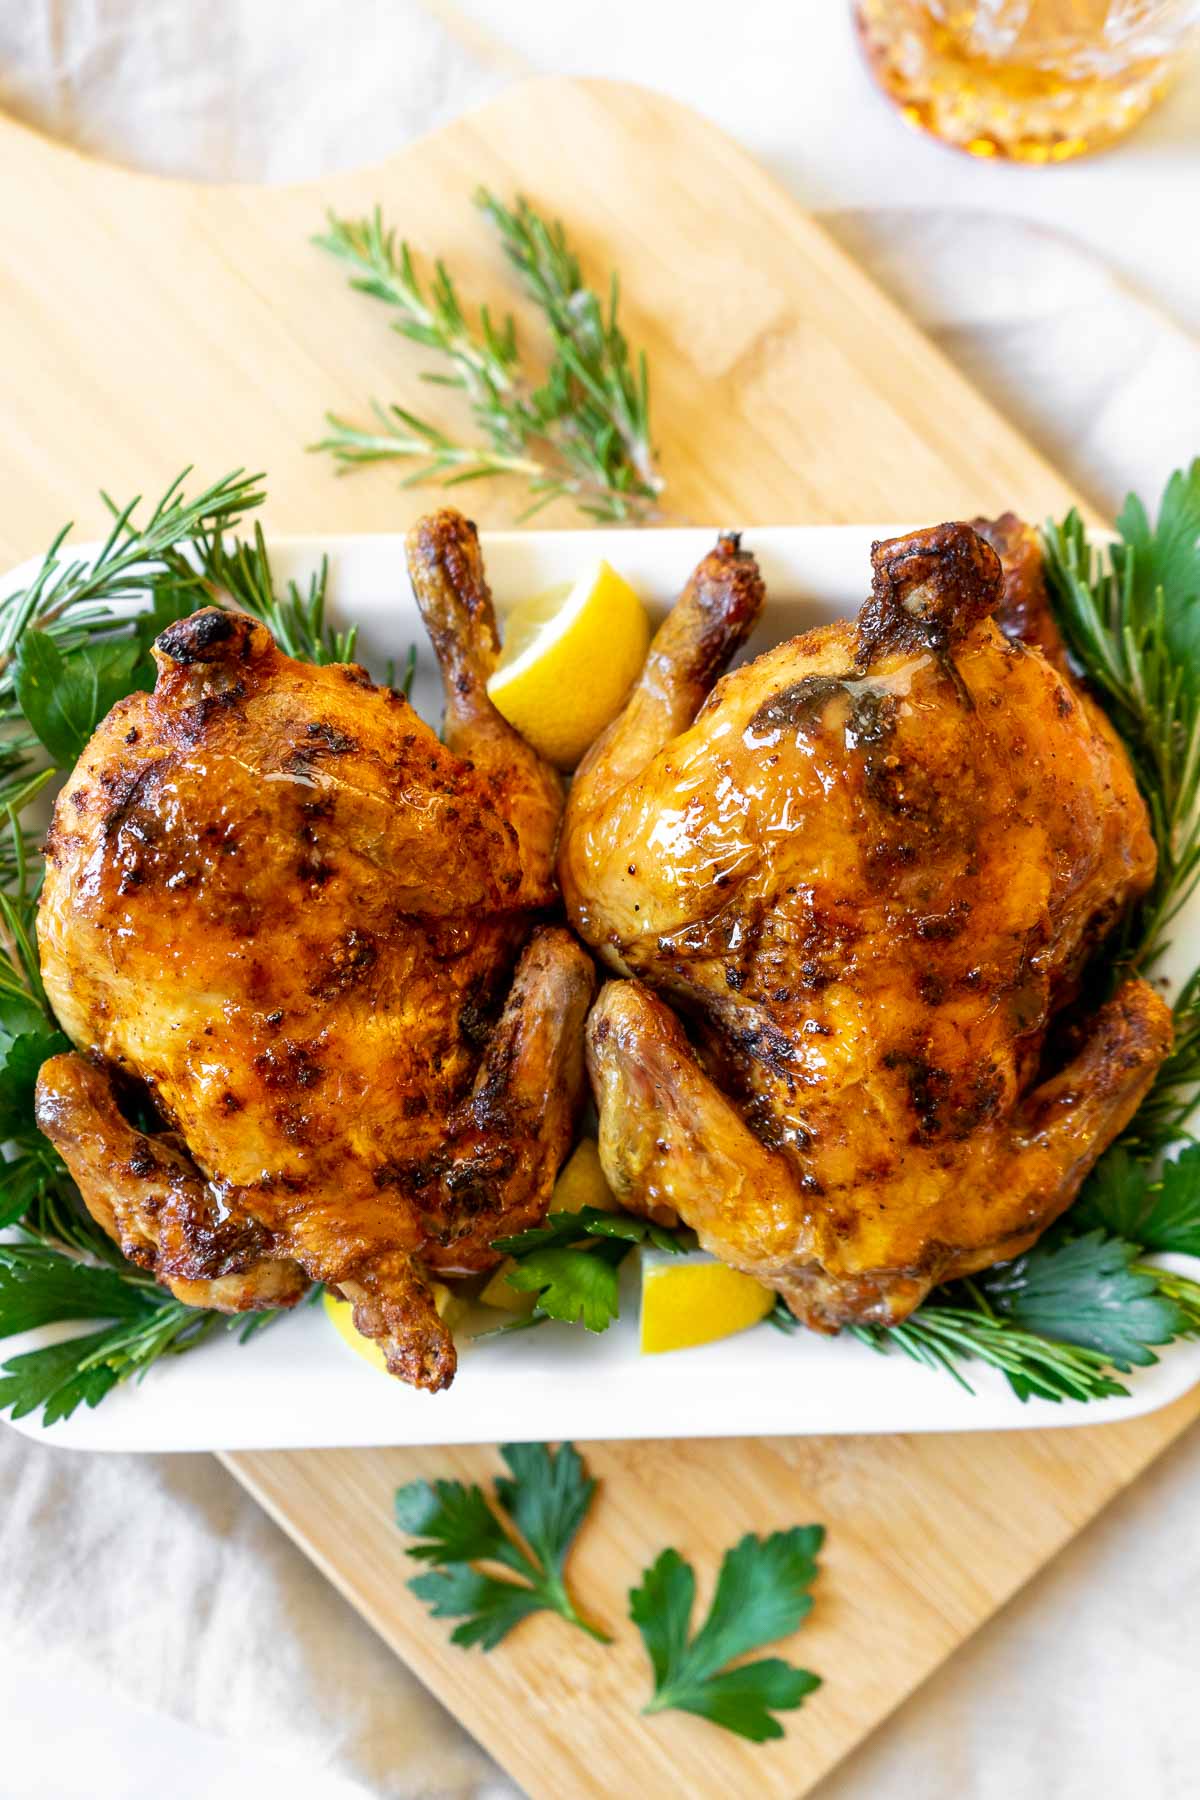 Two Cornish hens on a cutting board with rosemary.